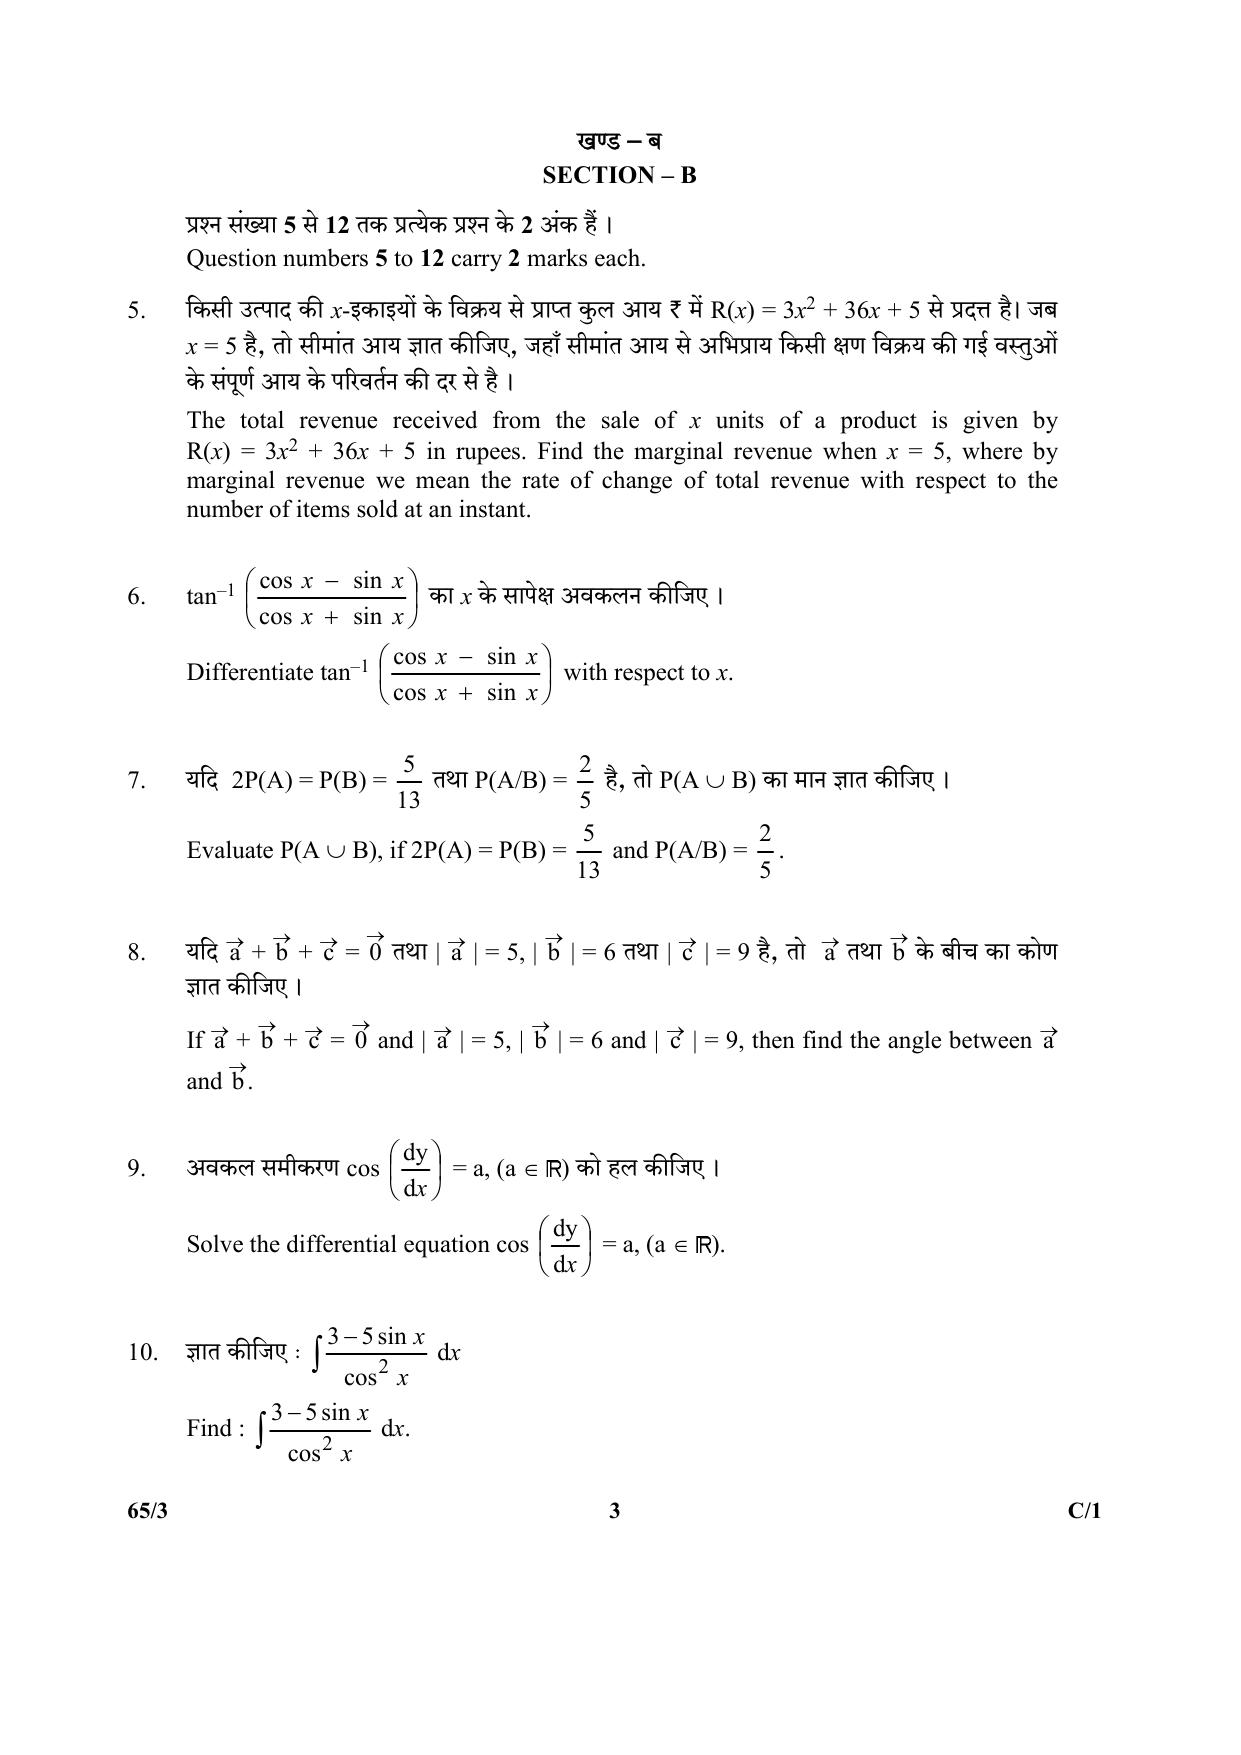 CBSE Class 12 65-3 (Mathematics) 2018 Compartment Question Paper - Page 3